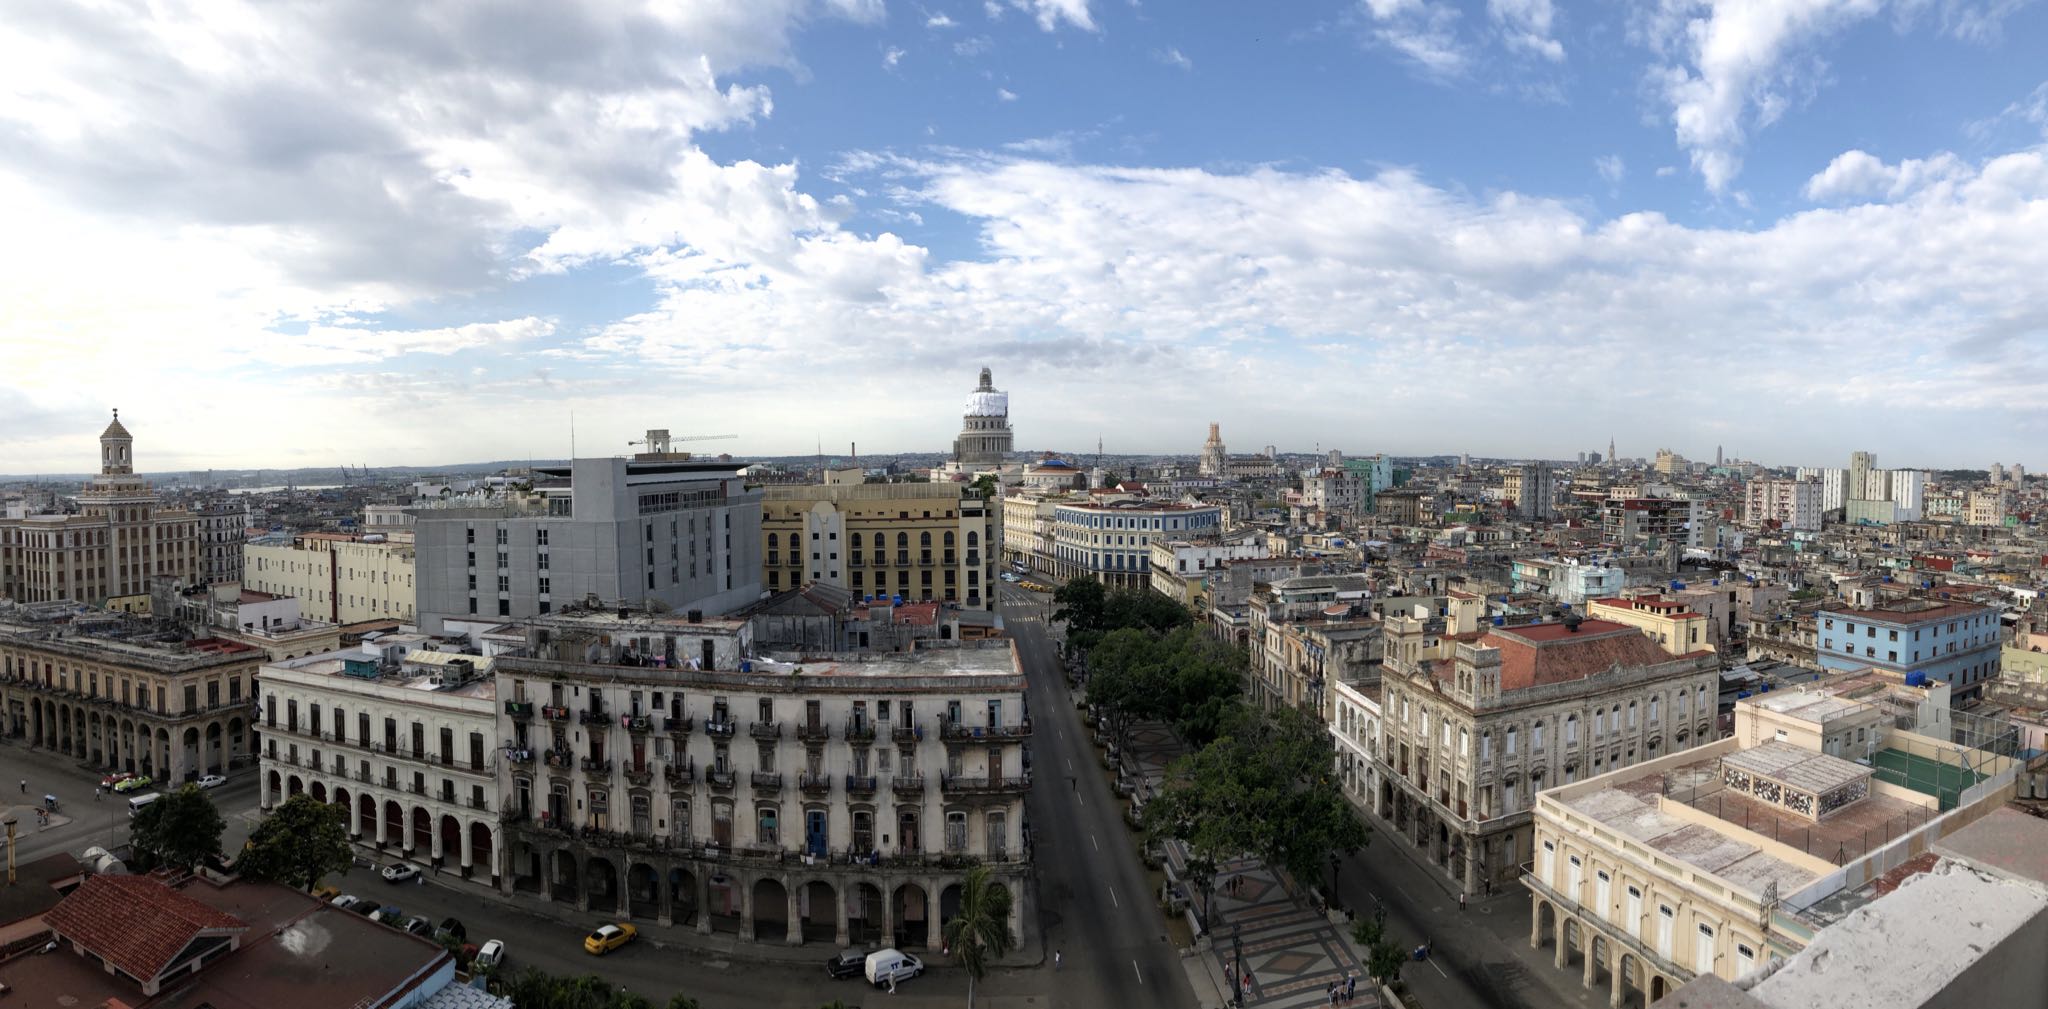 Photo 25 of 221 from the album Highlights Cuba 2019.